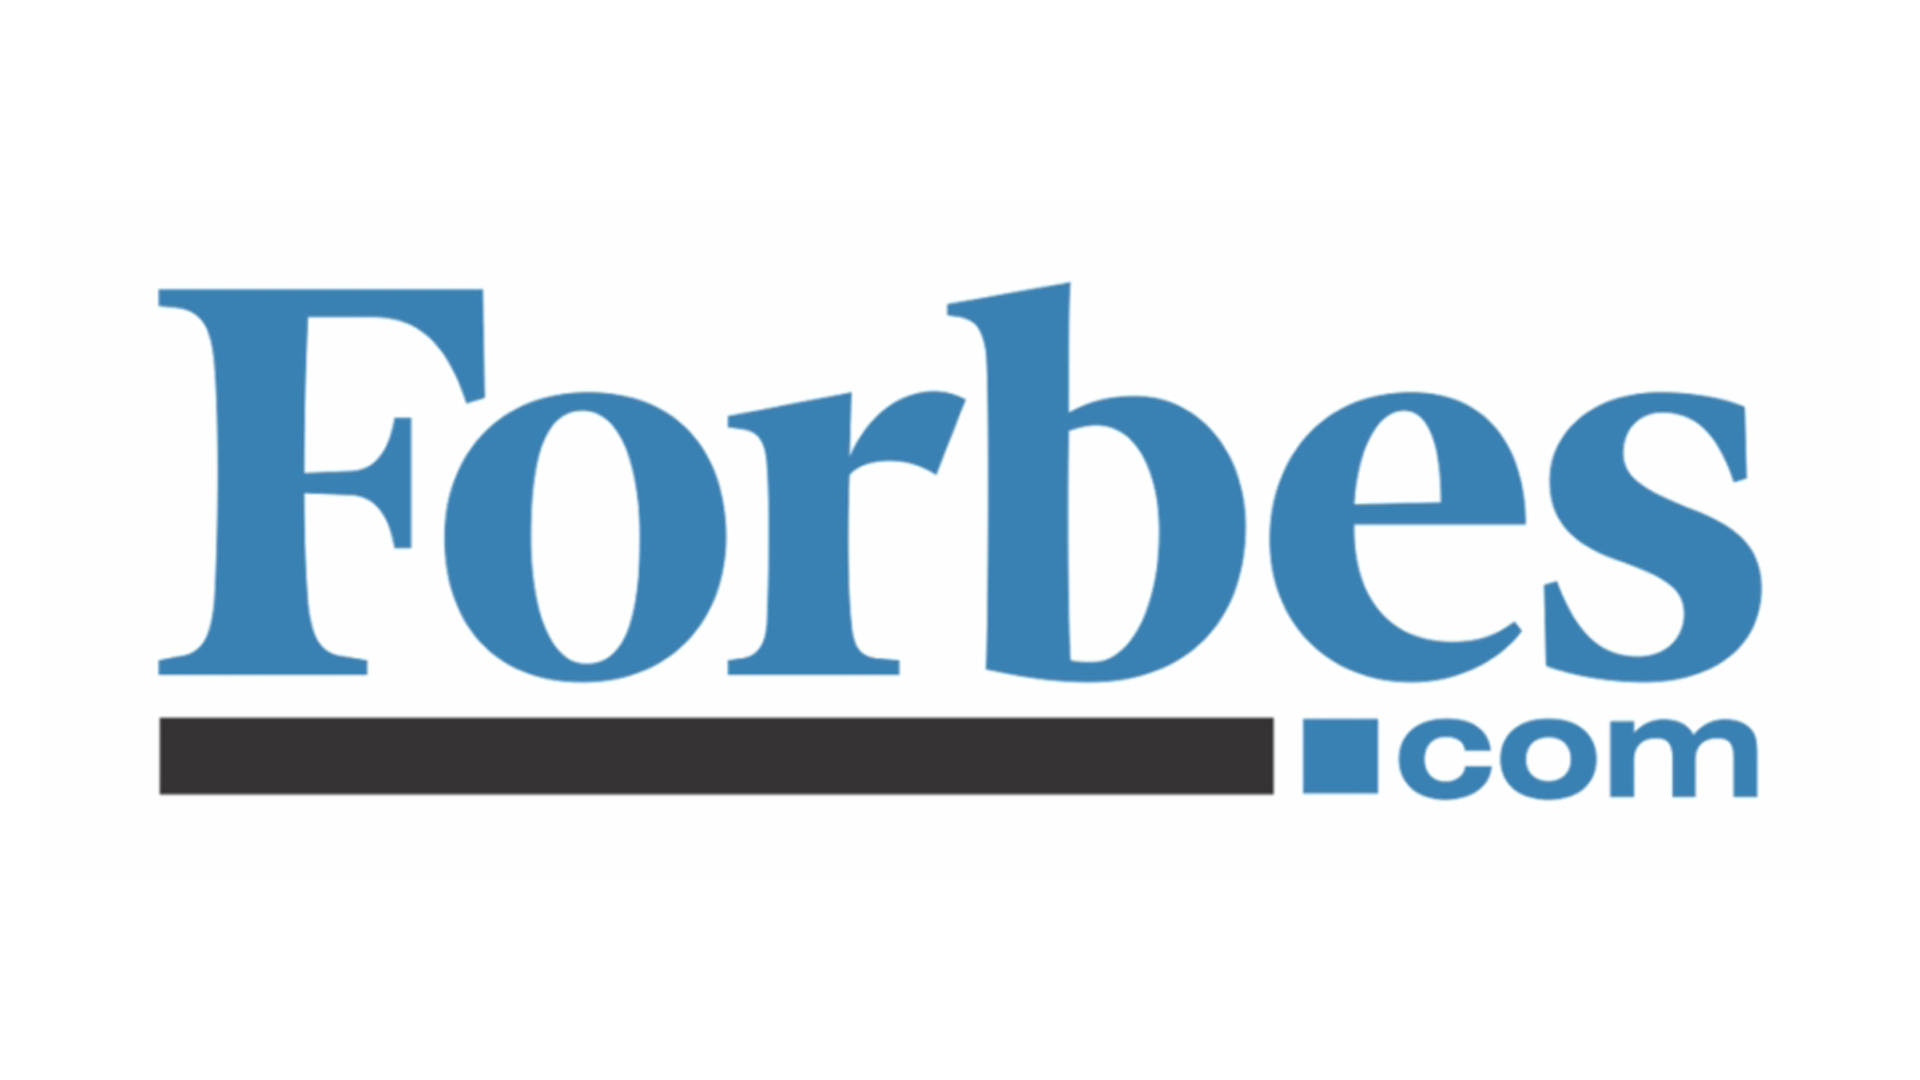 Michael Kureth Featured Article in Forbes.com Covering "Whiteboard Challenge®"